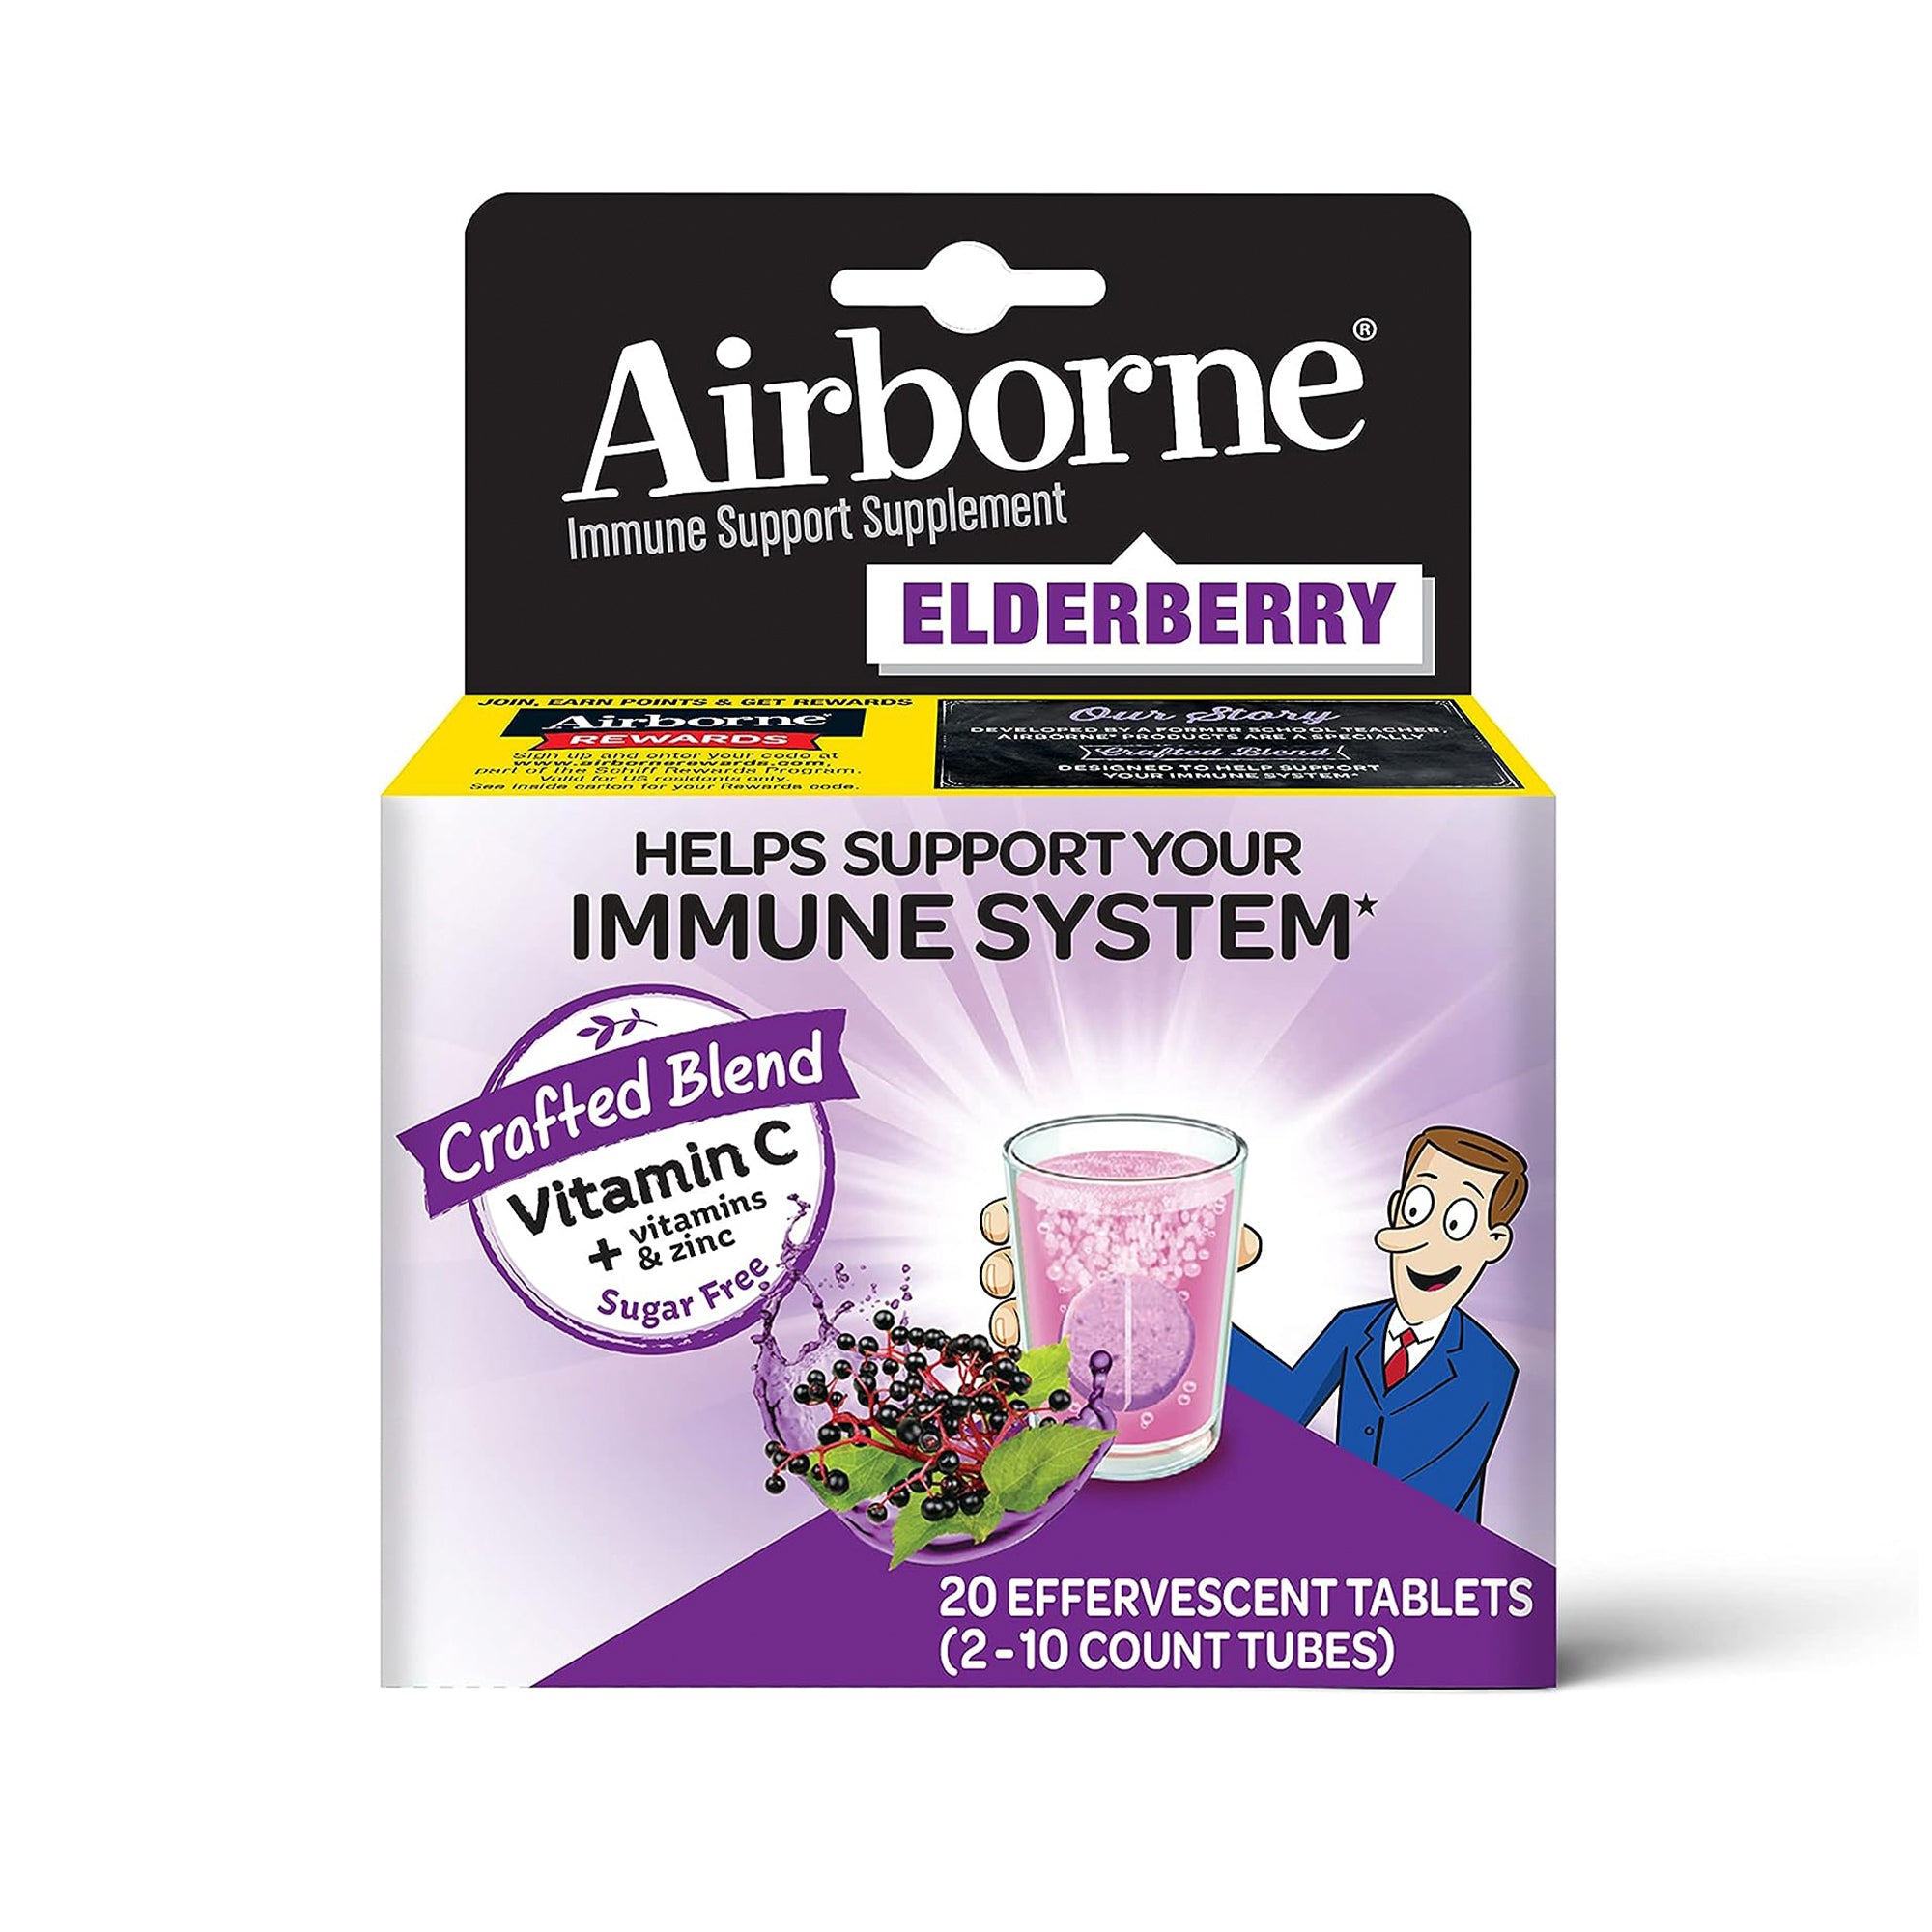 Airborne Elderberry Zinc & Vitamin C Effervescent Tablets for Immune Support Supplement With Powerful Antioxidant Vitamins A C E, 20 Tablets